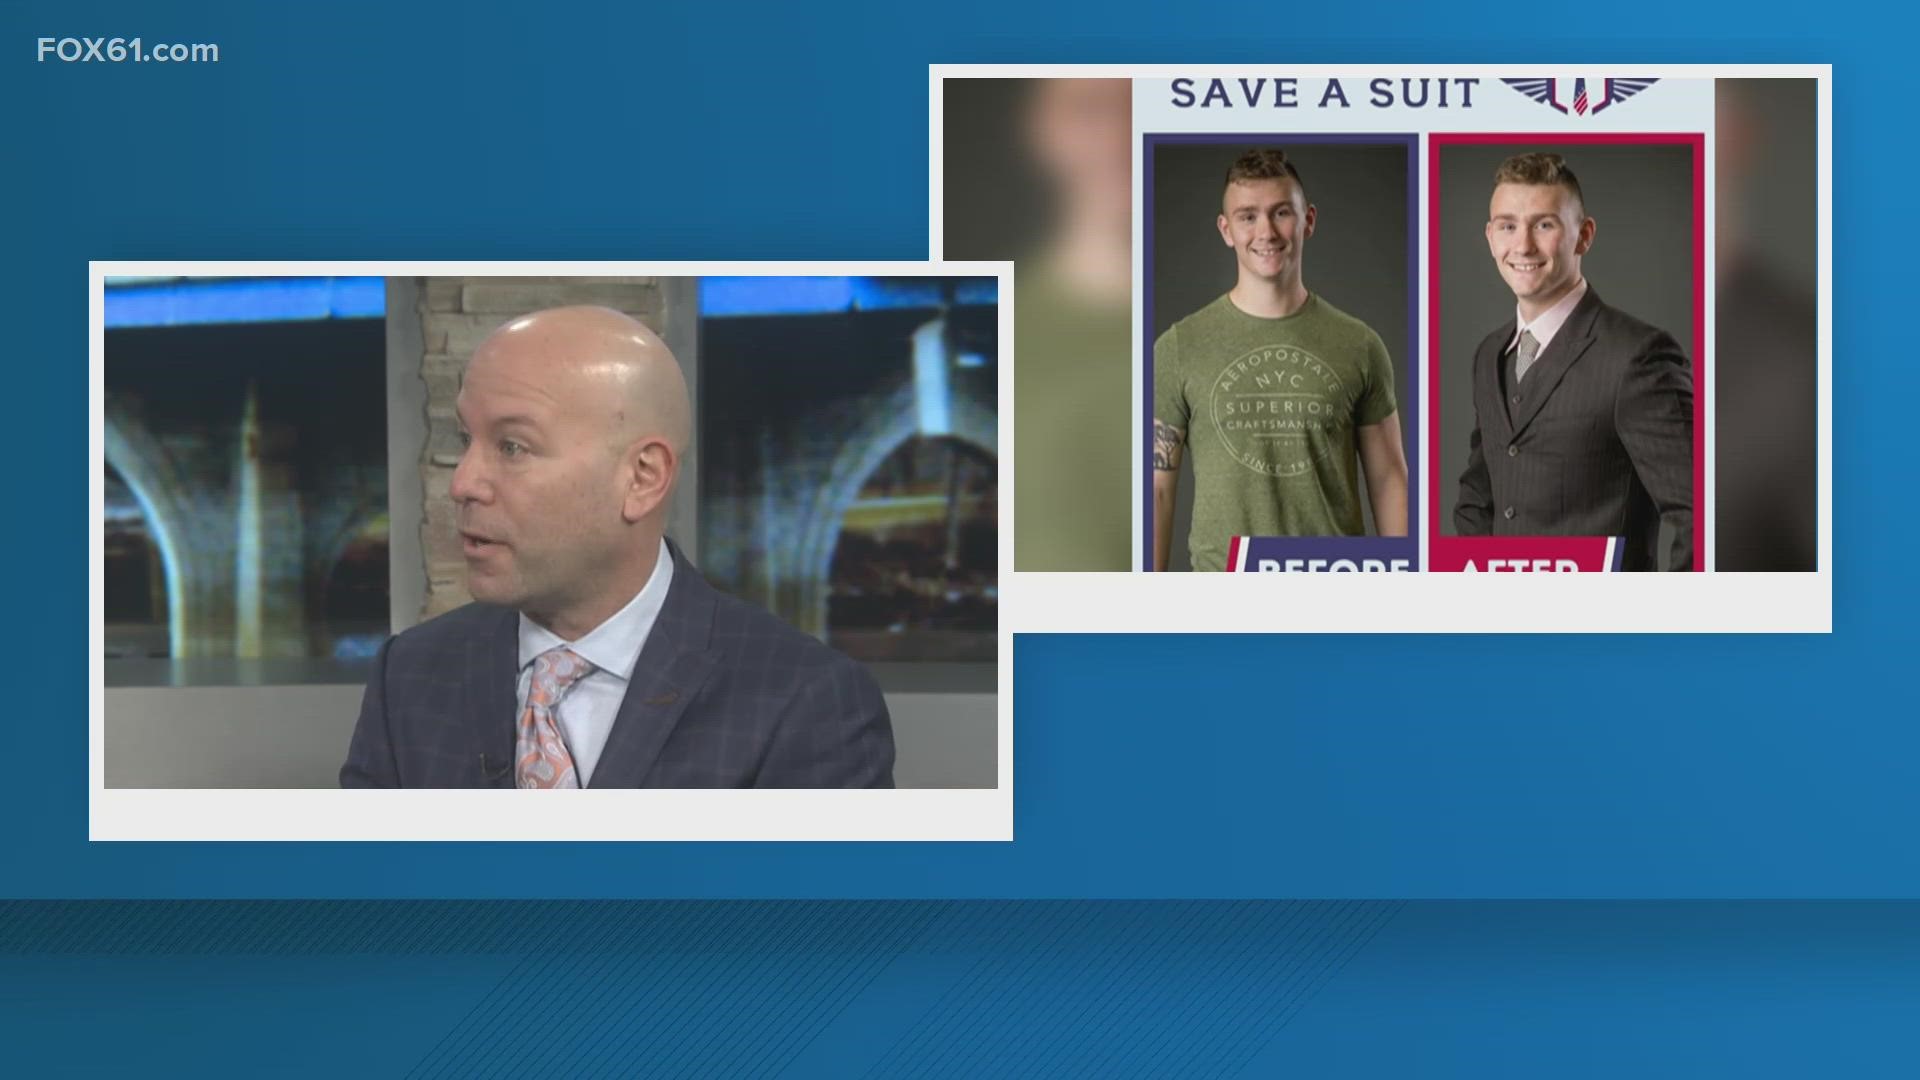 Tara and Tony Costanzo from Costanzo Clothing in Wethersfield are helping military veterans suit up for the next move in their career through Save a Suit.